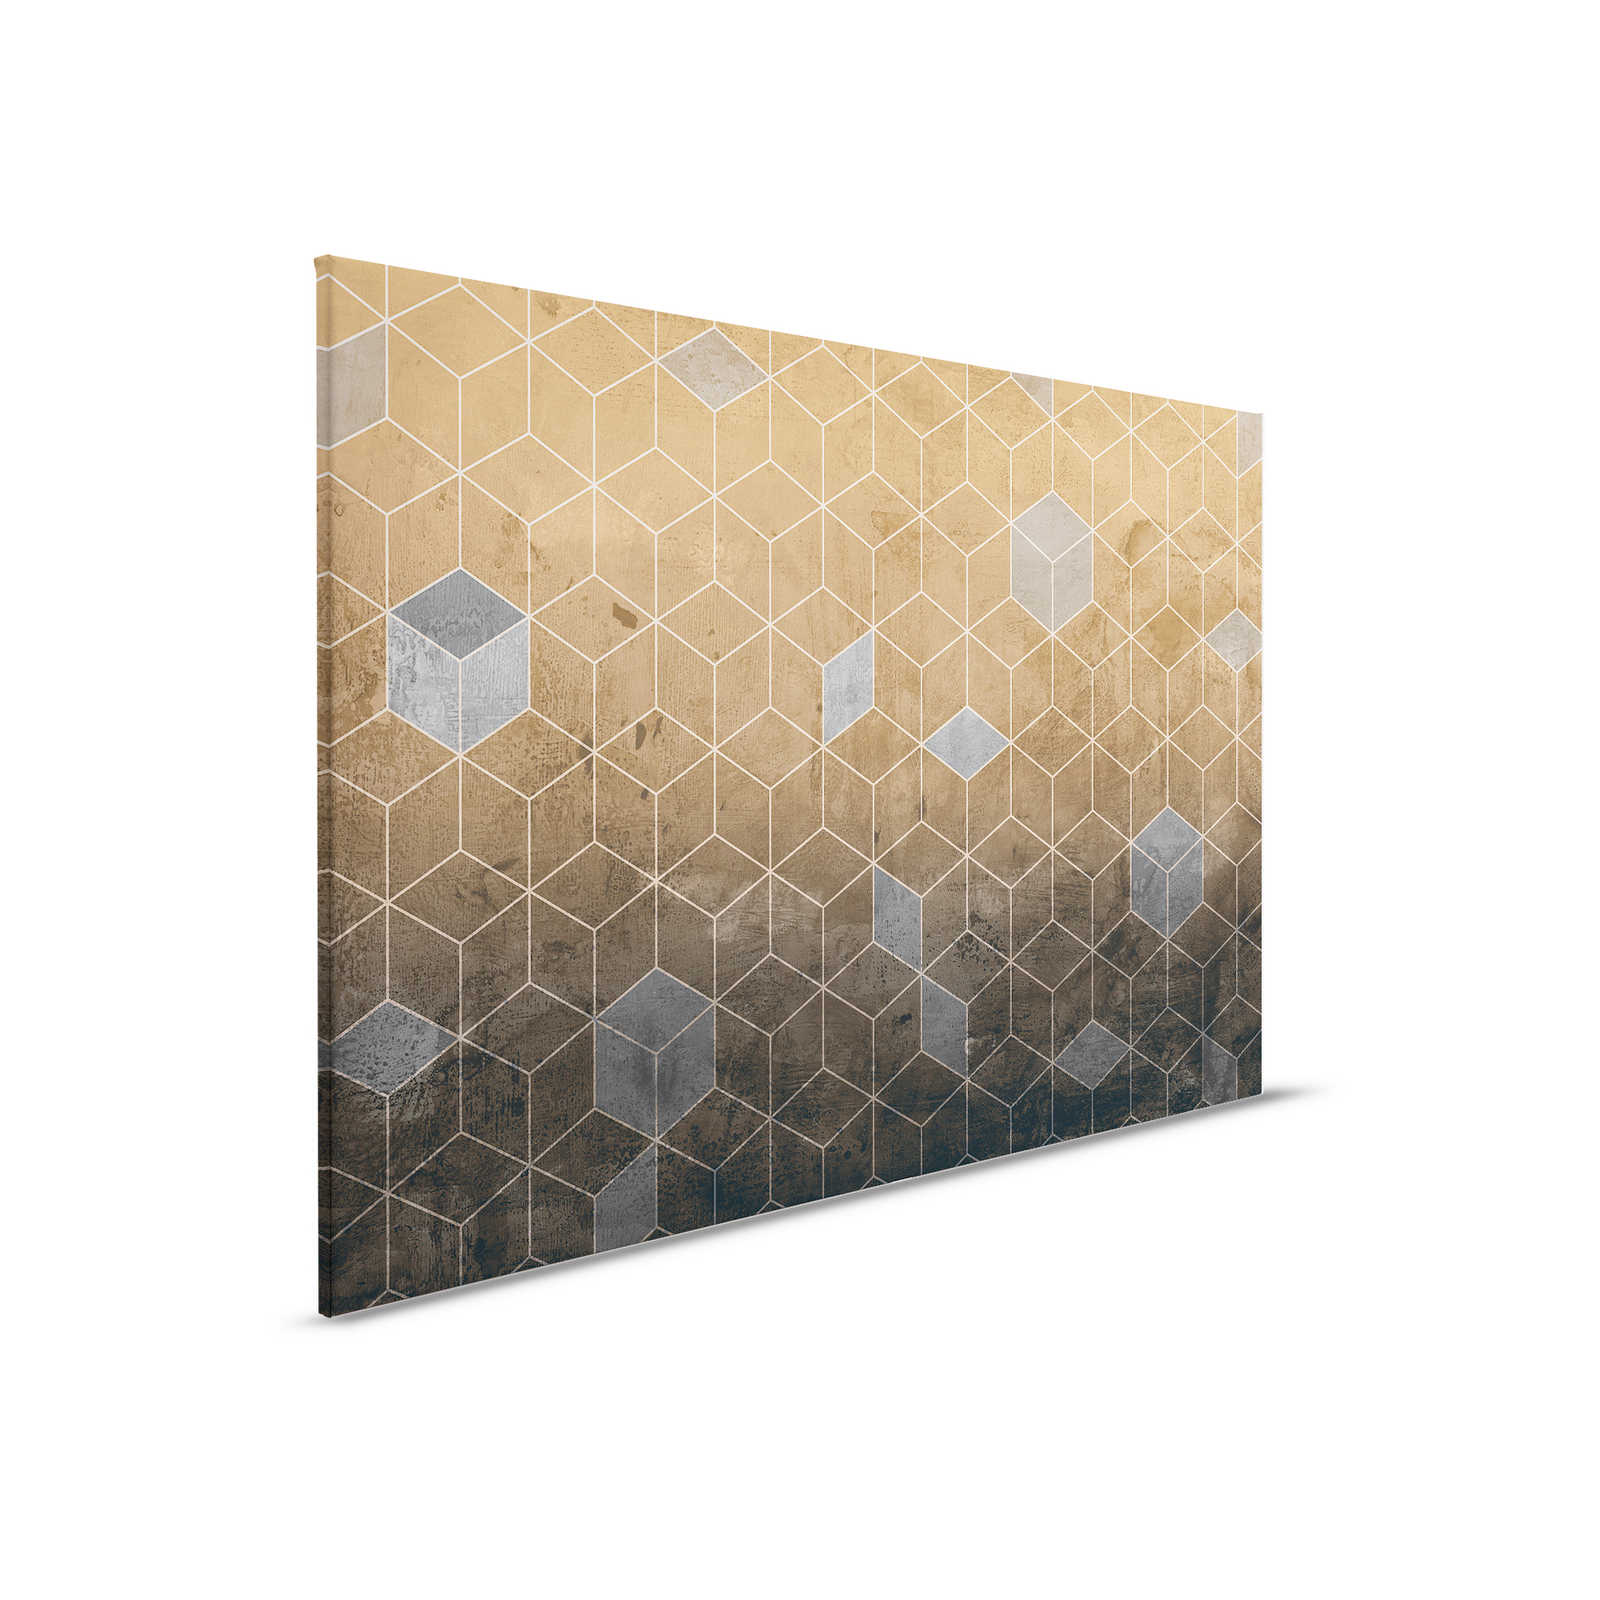         Canvas painting with block pattern in 3D look - 0.90 m x 0.60 m
    